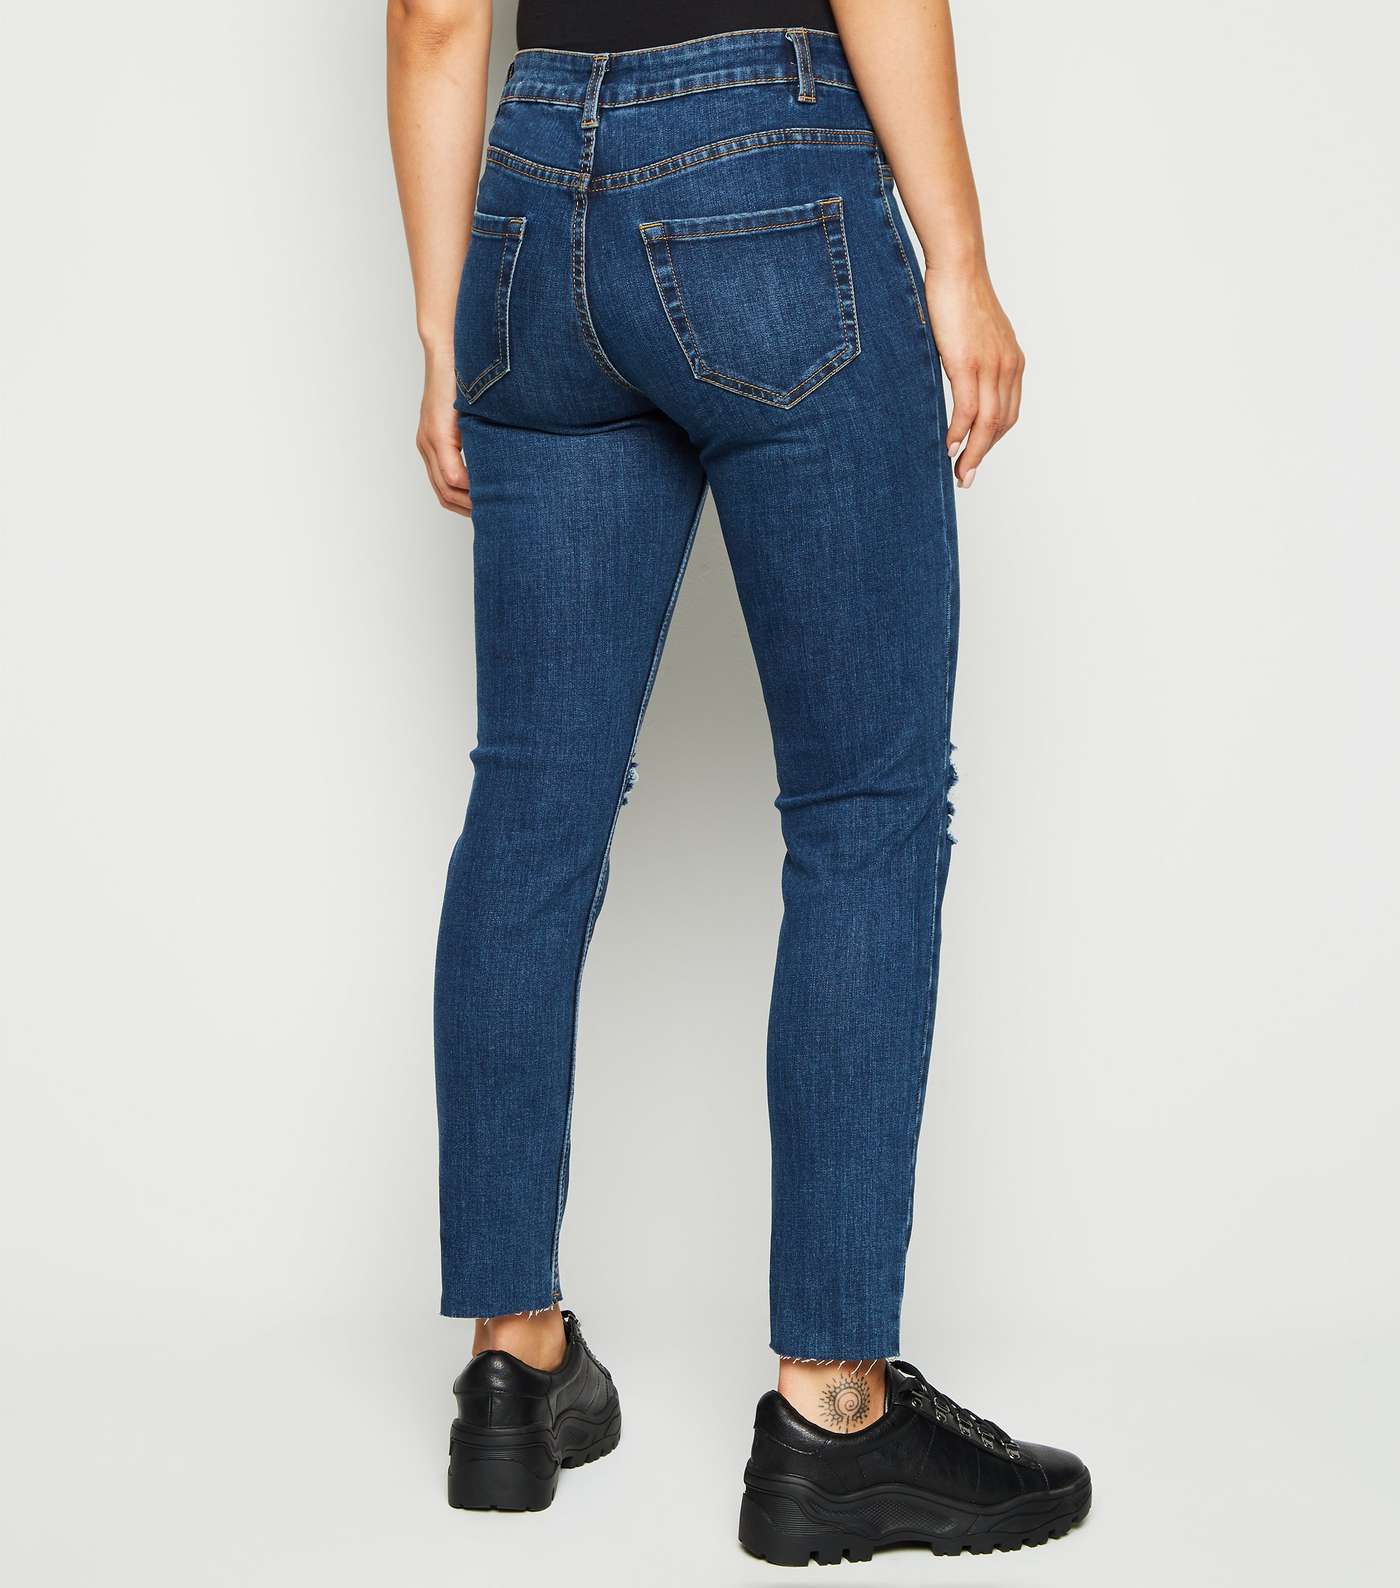 Petite Blue Rinse Wash Ripped Skinny Jeans Image 3